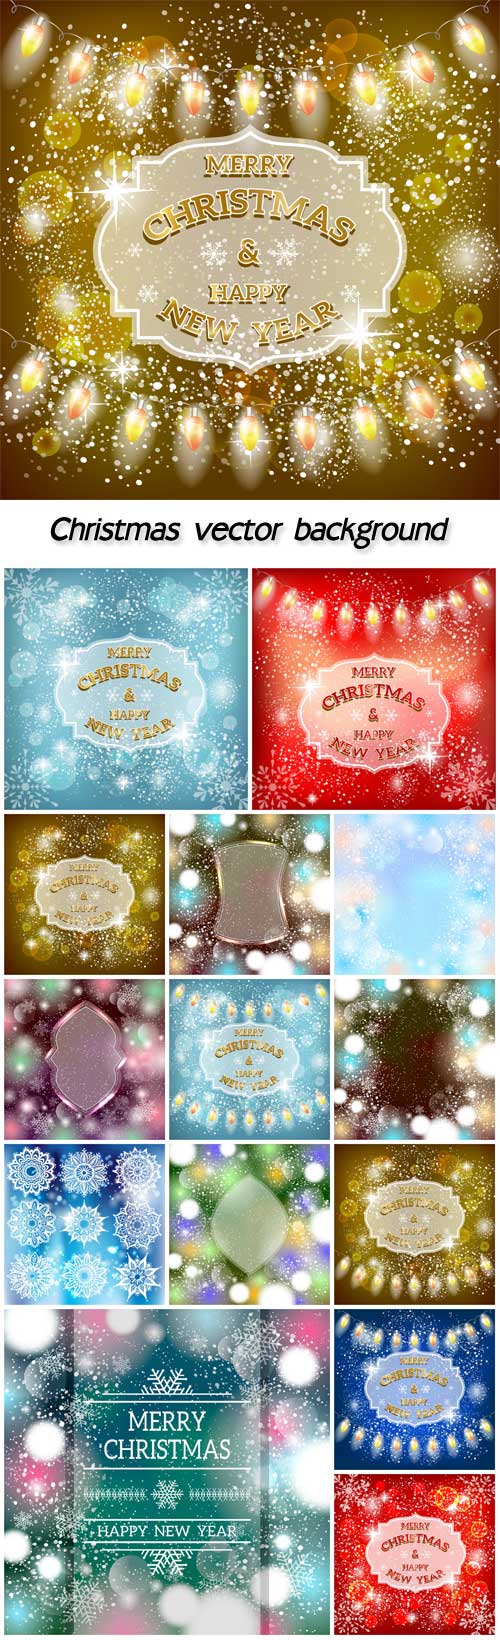 Christmas vector background with sparkling garlands and snowflakes